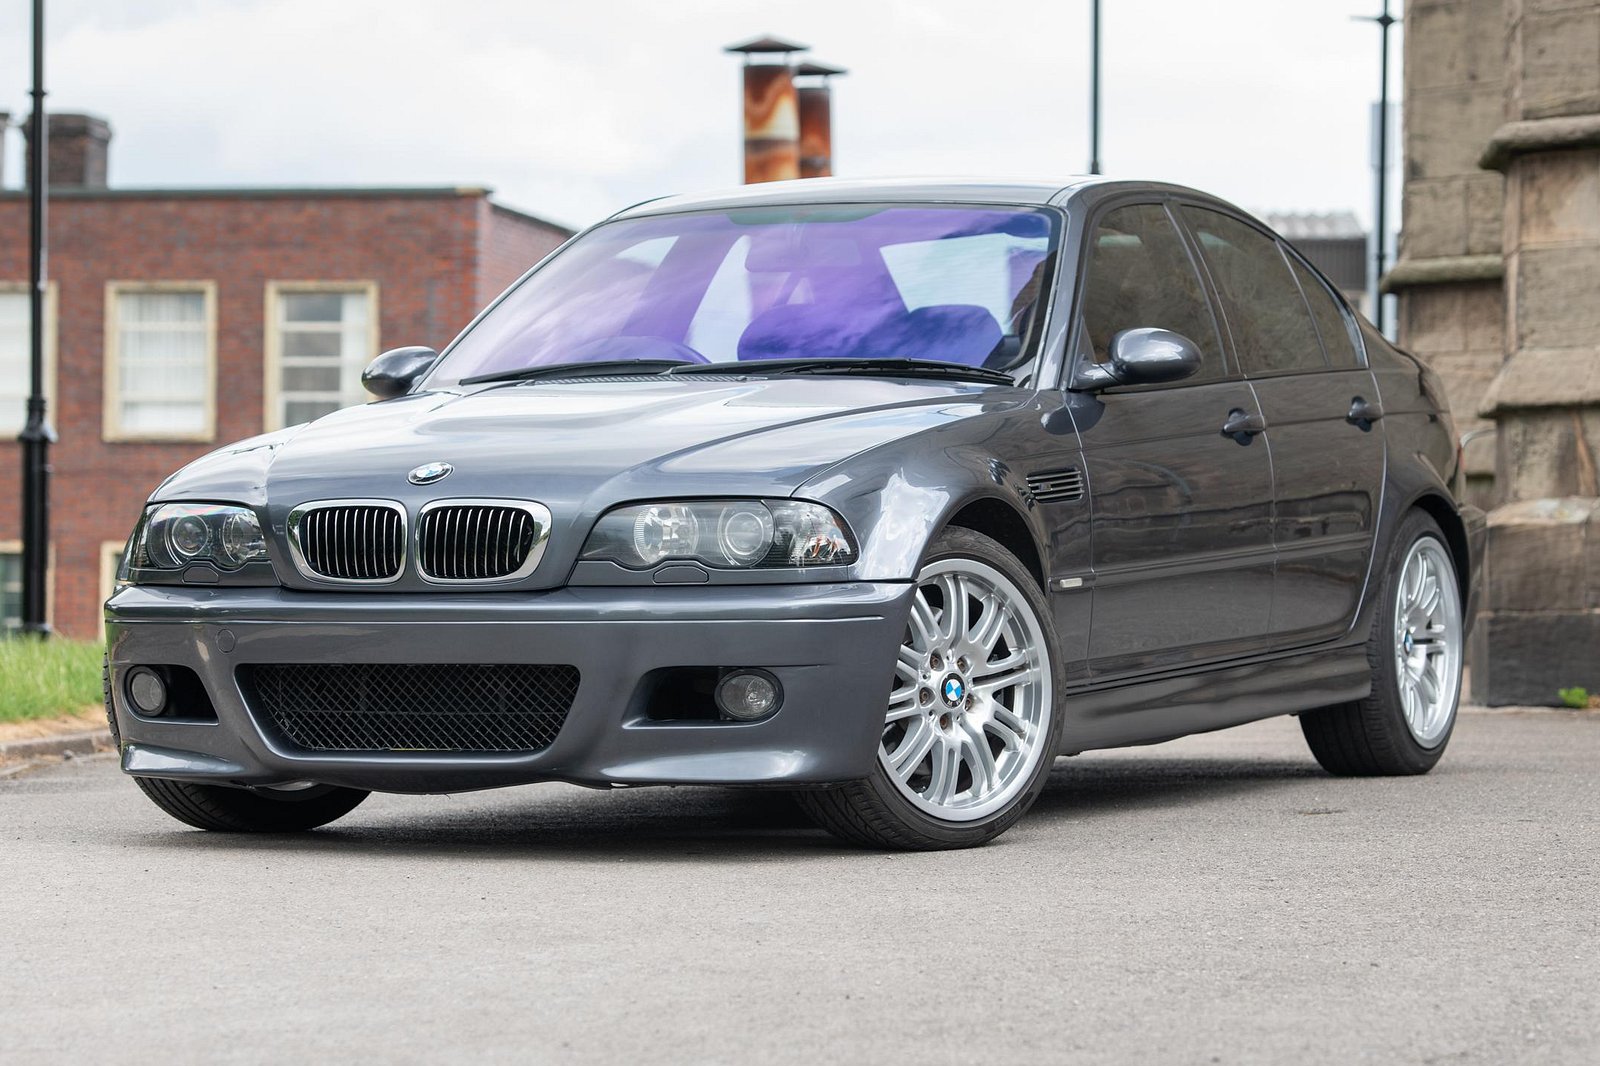 This E46 BMW M3 Four-Door Sedan Was Once A Humble 320i